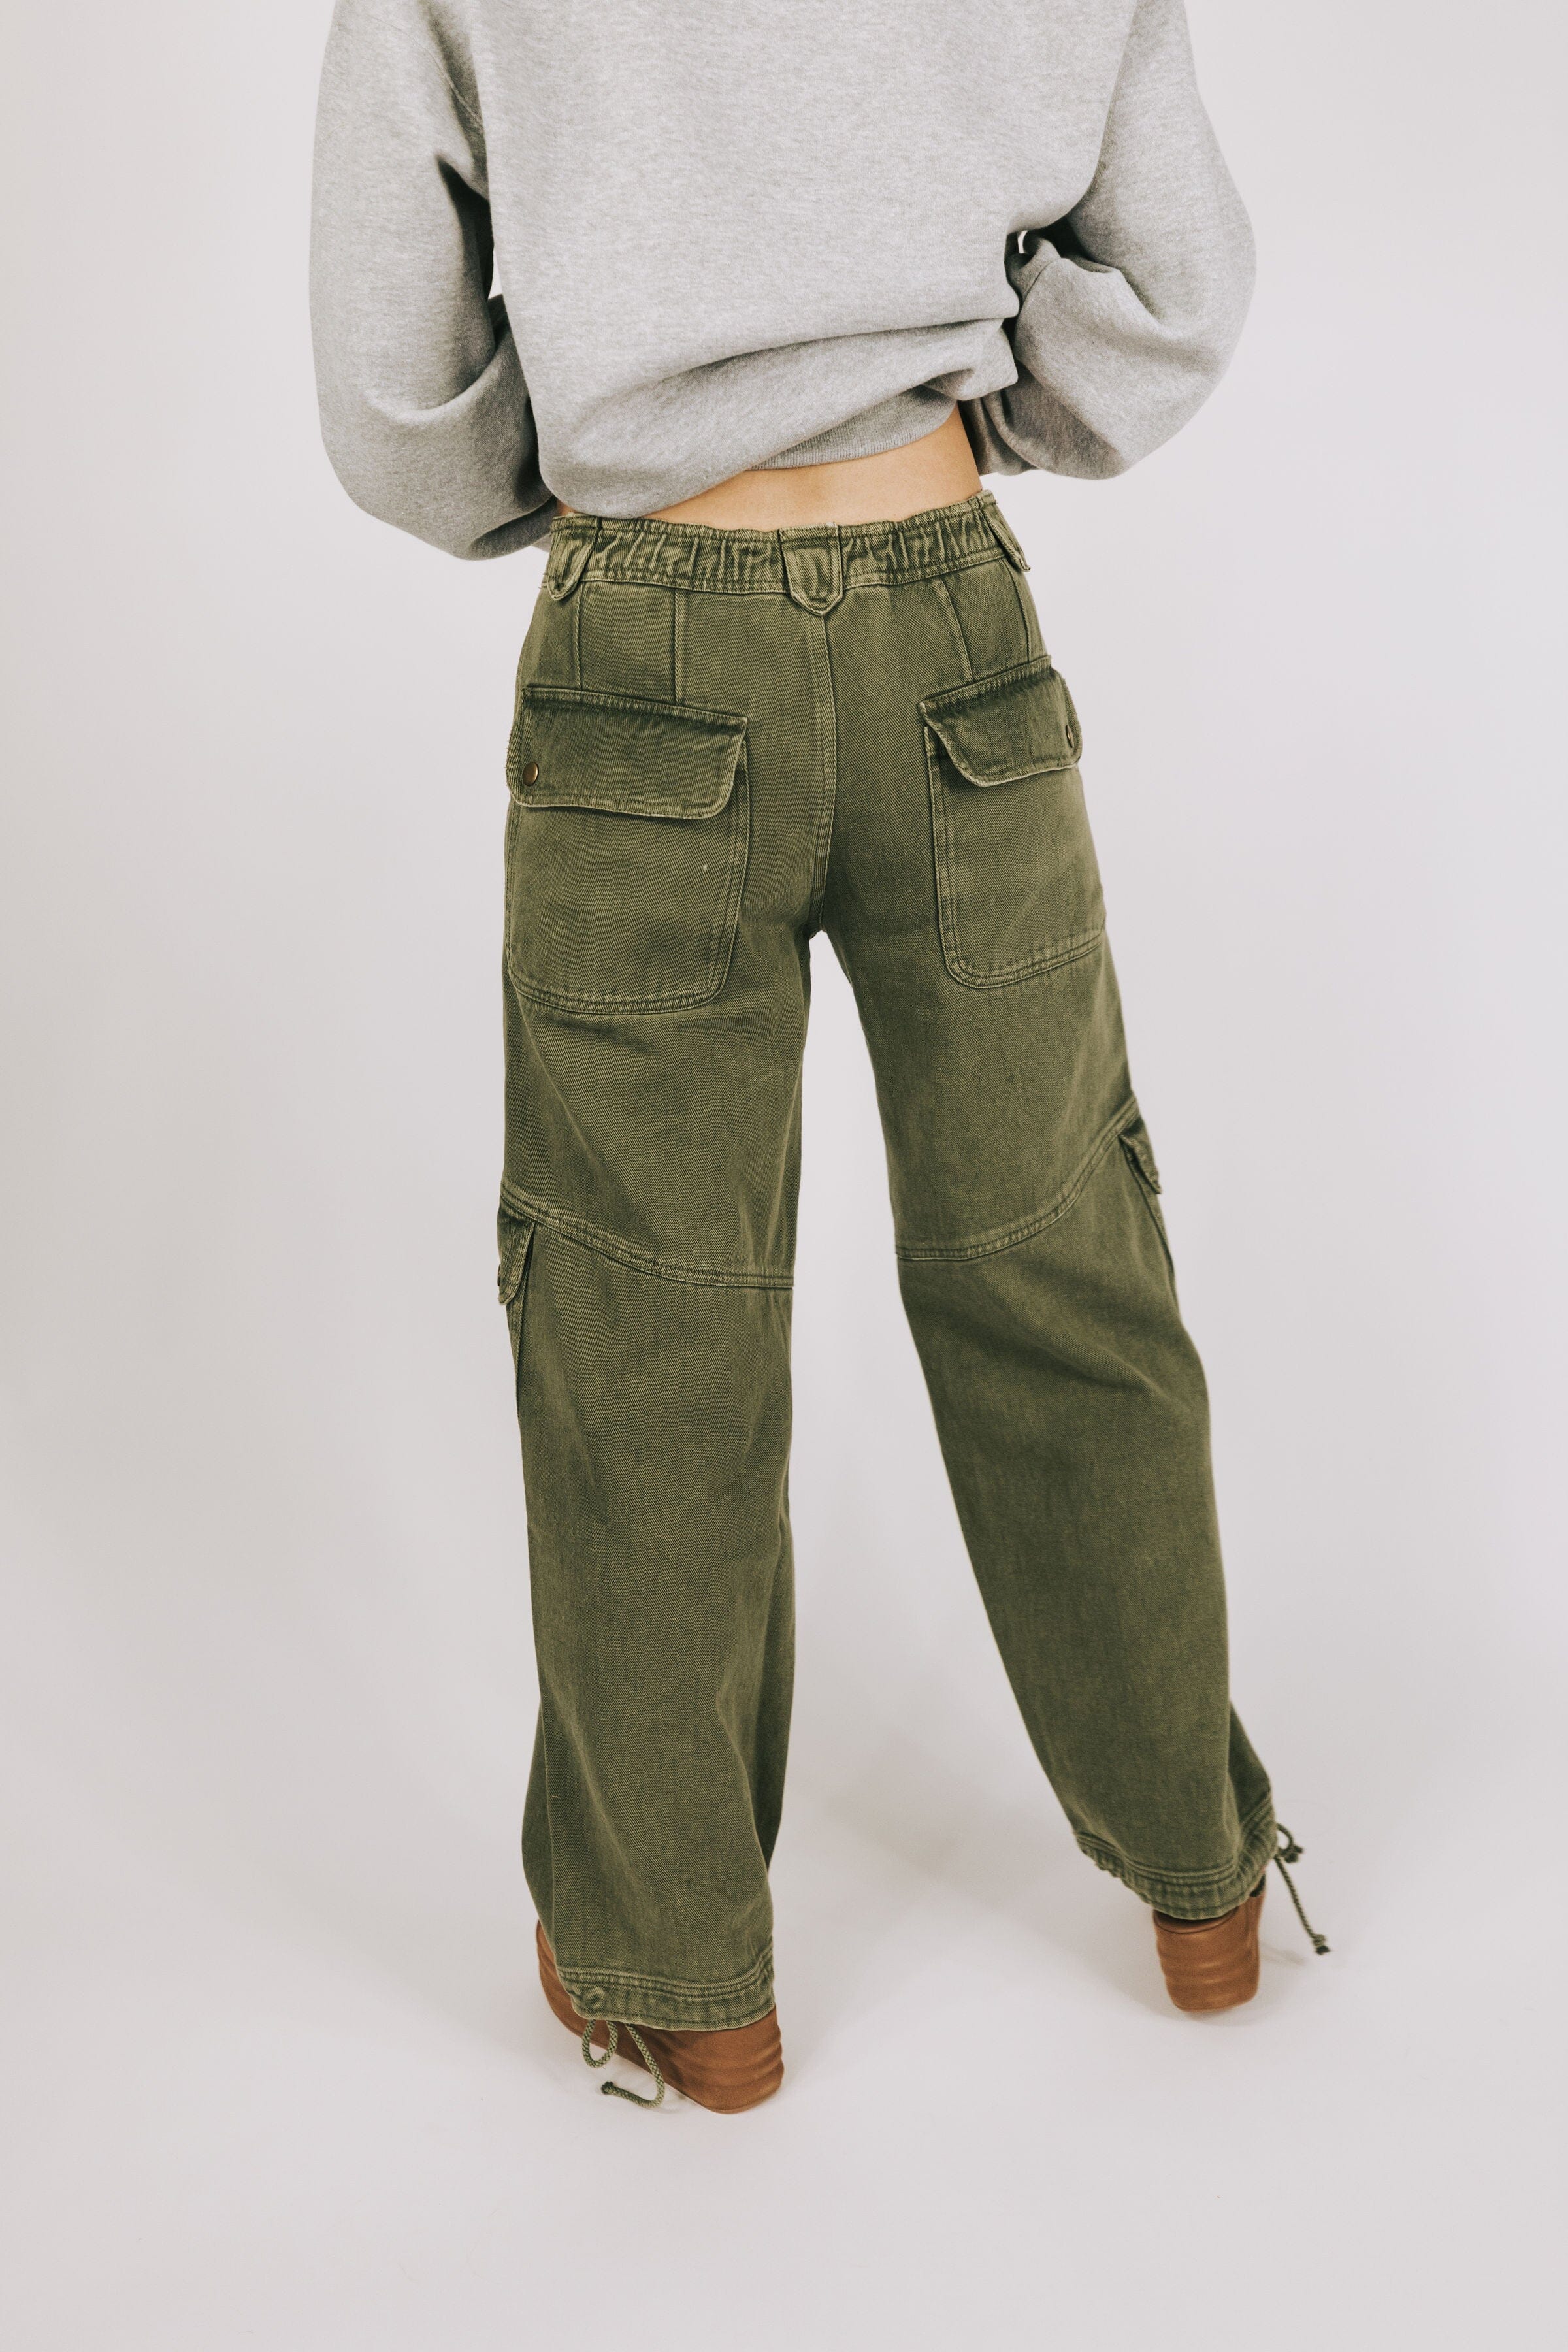 Travel Outfit Win: Free People High-Waist Utility Pants All Day